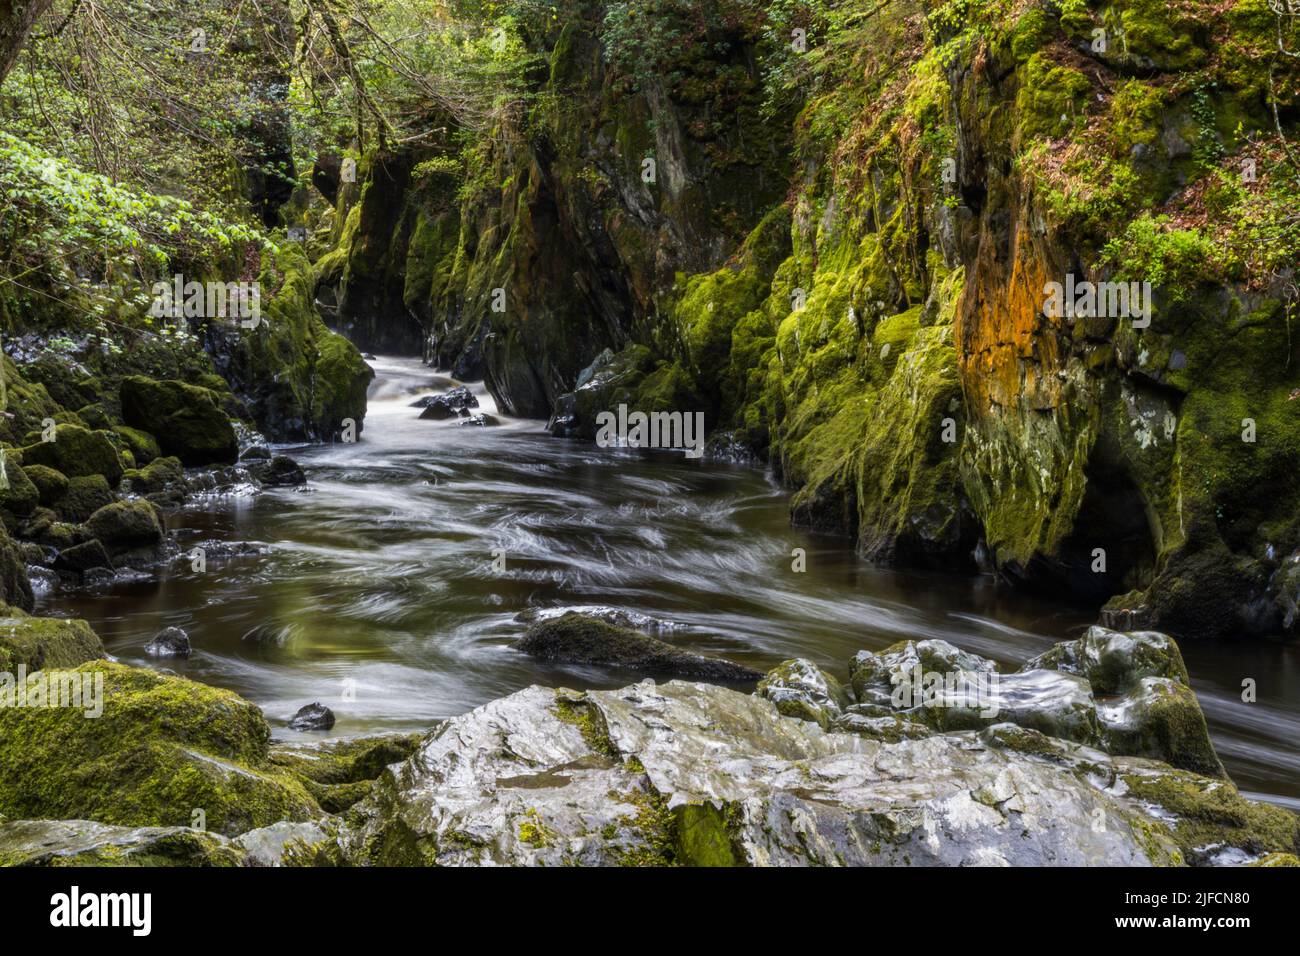 Beautiful Gorge with river The Fairy Glen, Betws-y-Coed, Snowdonia, Wales, UK, landscape and wide angle, water blurred Stock Photo